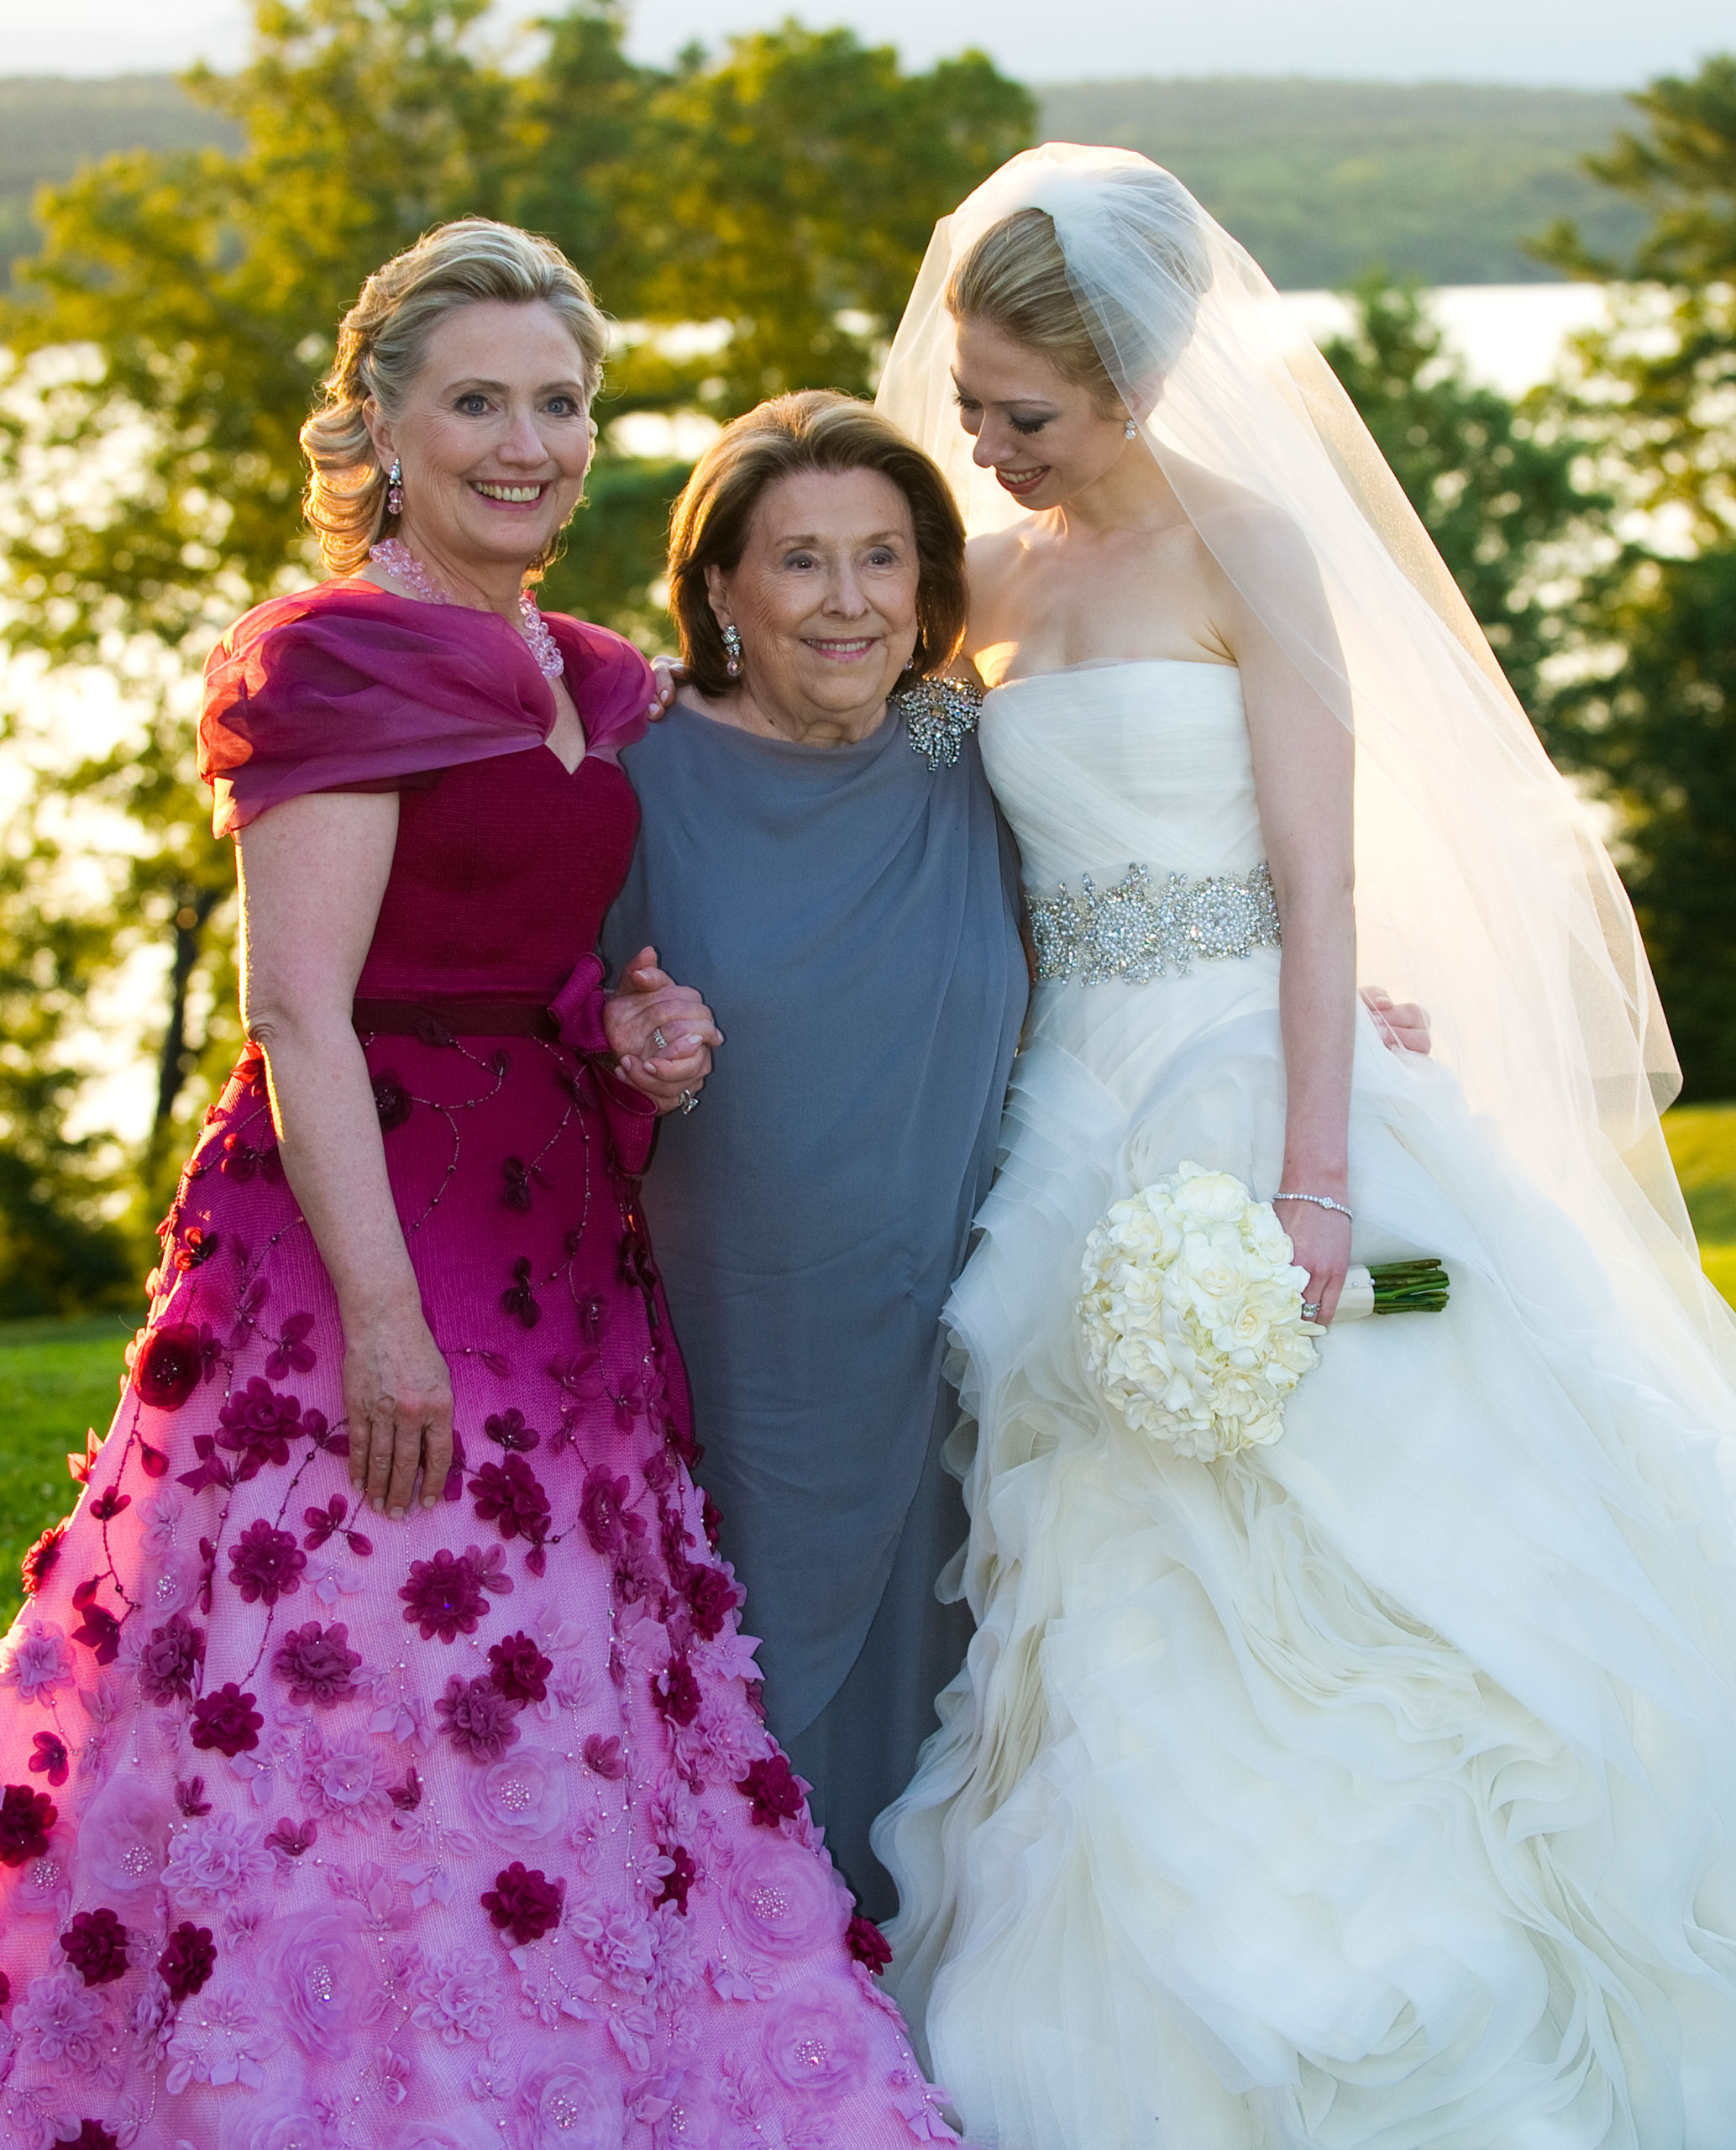 From left to right: Secretary of State Hillary Clinton, Dorothy Rodham and Chelsea Clinton pose for formal photos after the wedding. Chelsea Clinton was married to Marc Mezvinsky at Astor Court in Rhinebeck, NY on July 31, 2010. Mandatory Credit: Photo by Barbara Kinney